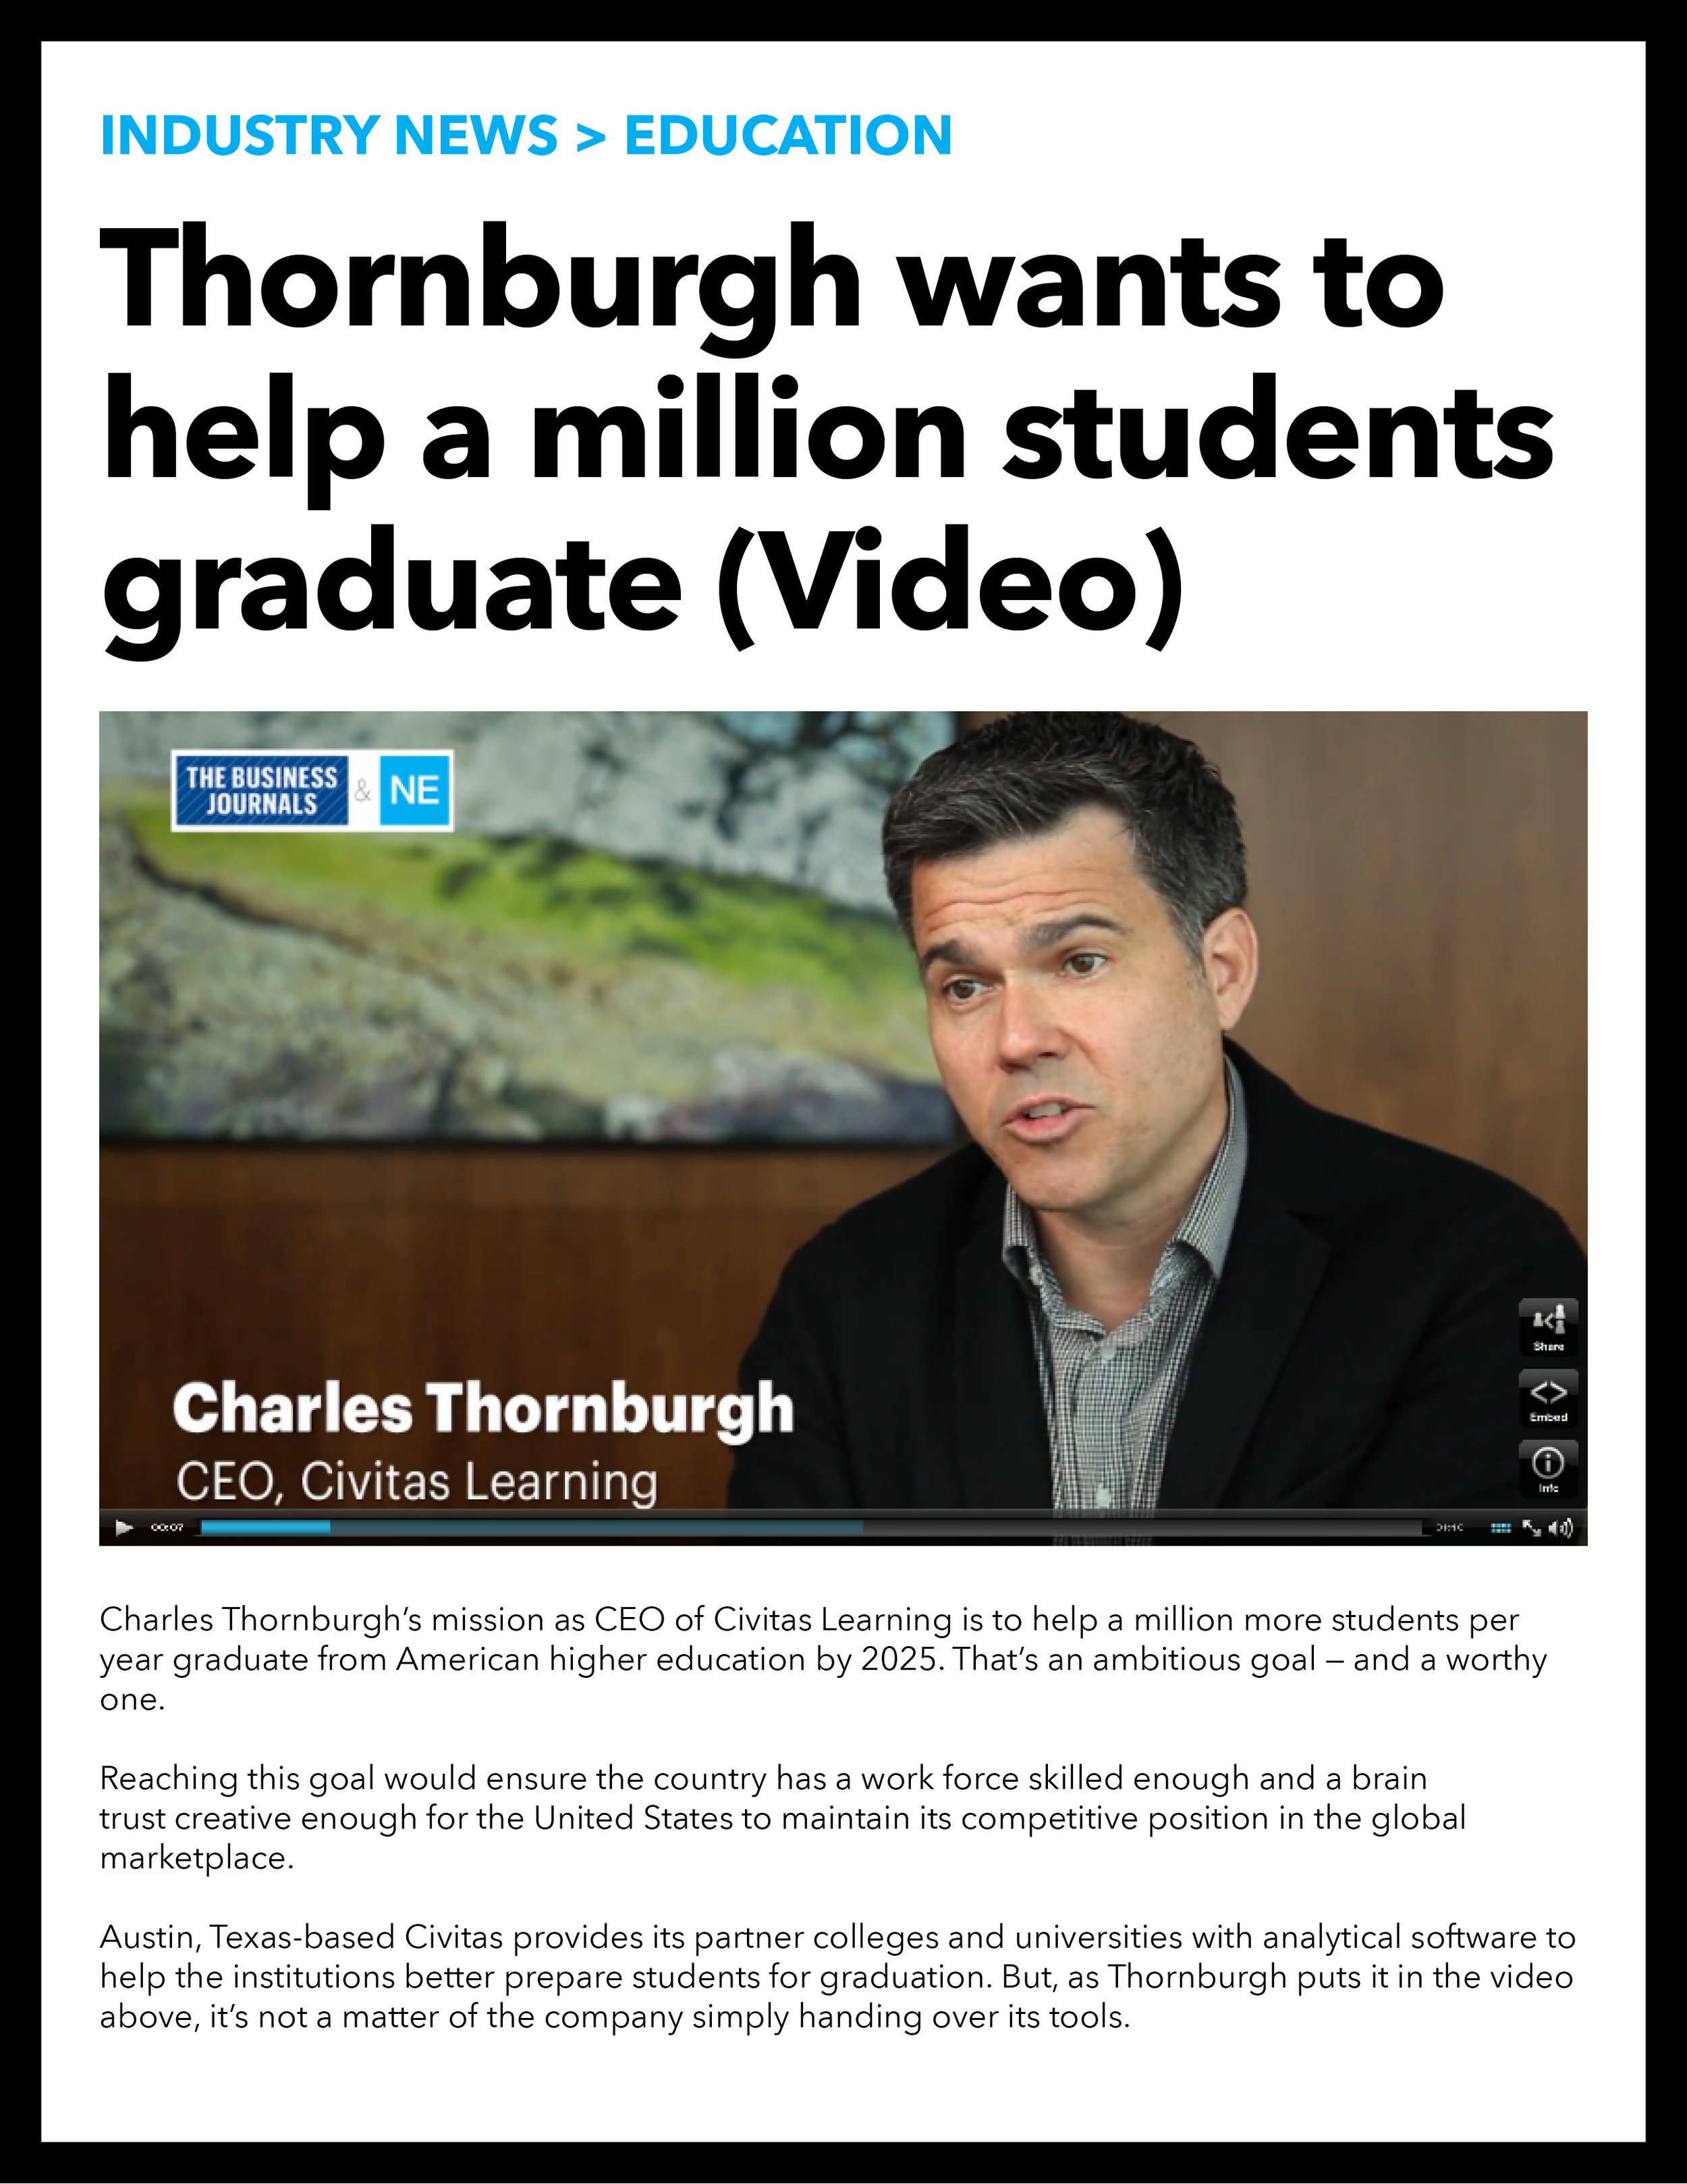 Charles Thornburgh, CEO of Civitas Learning